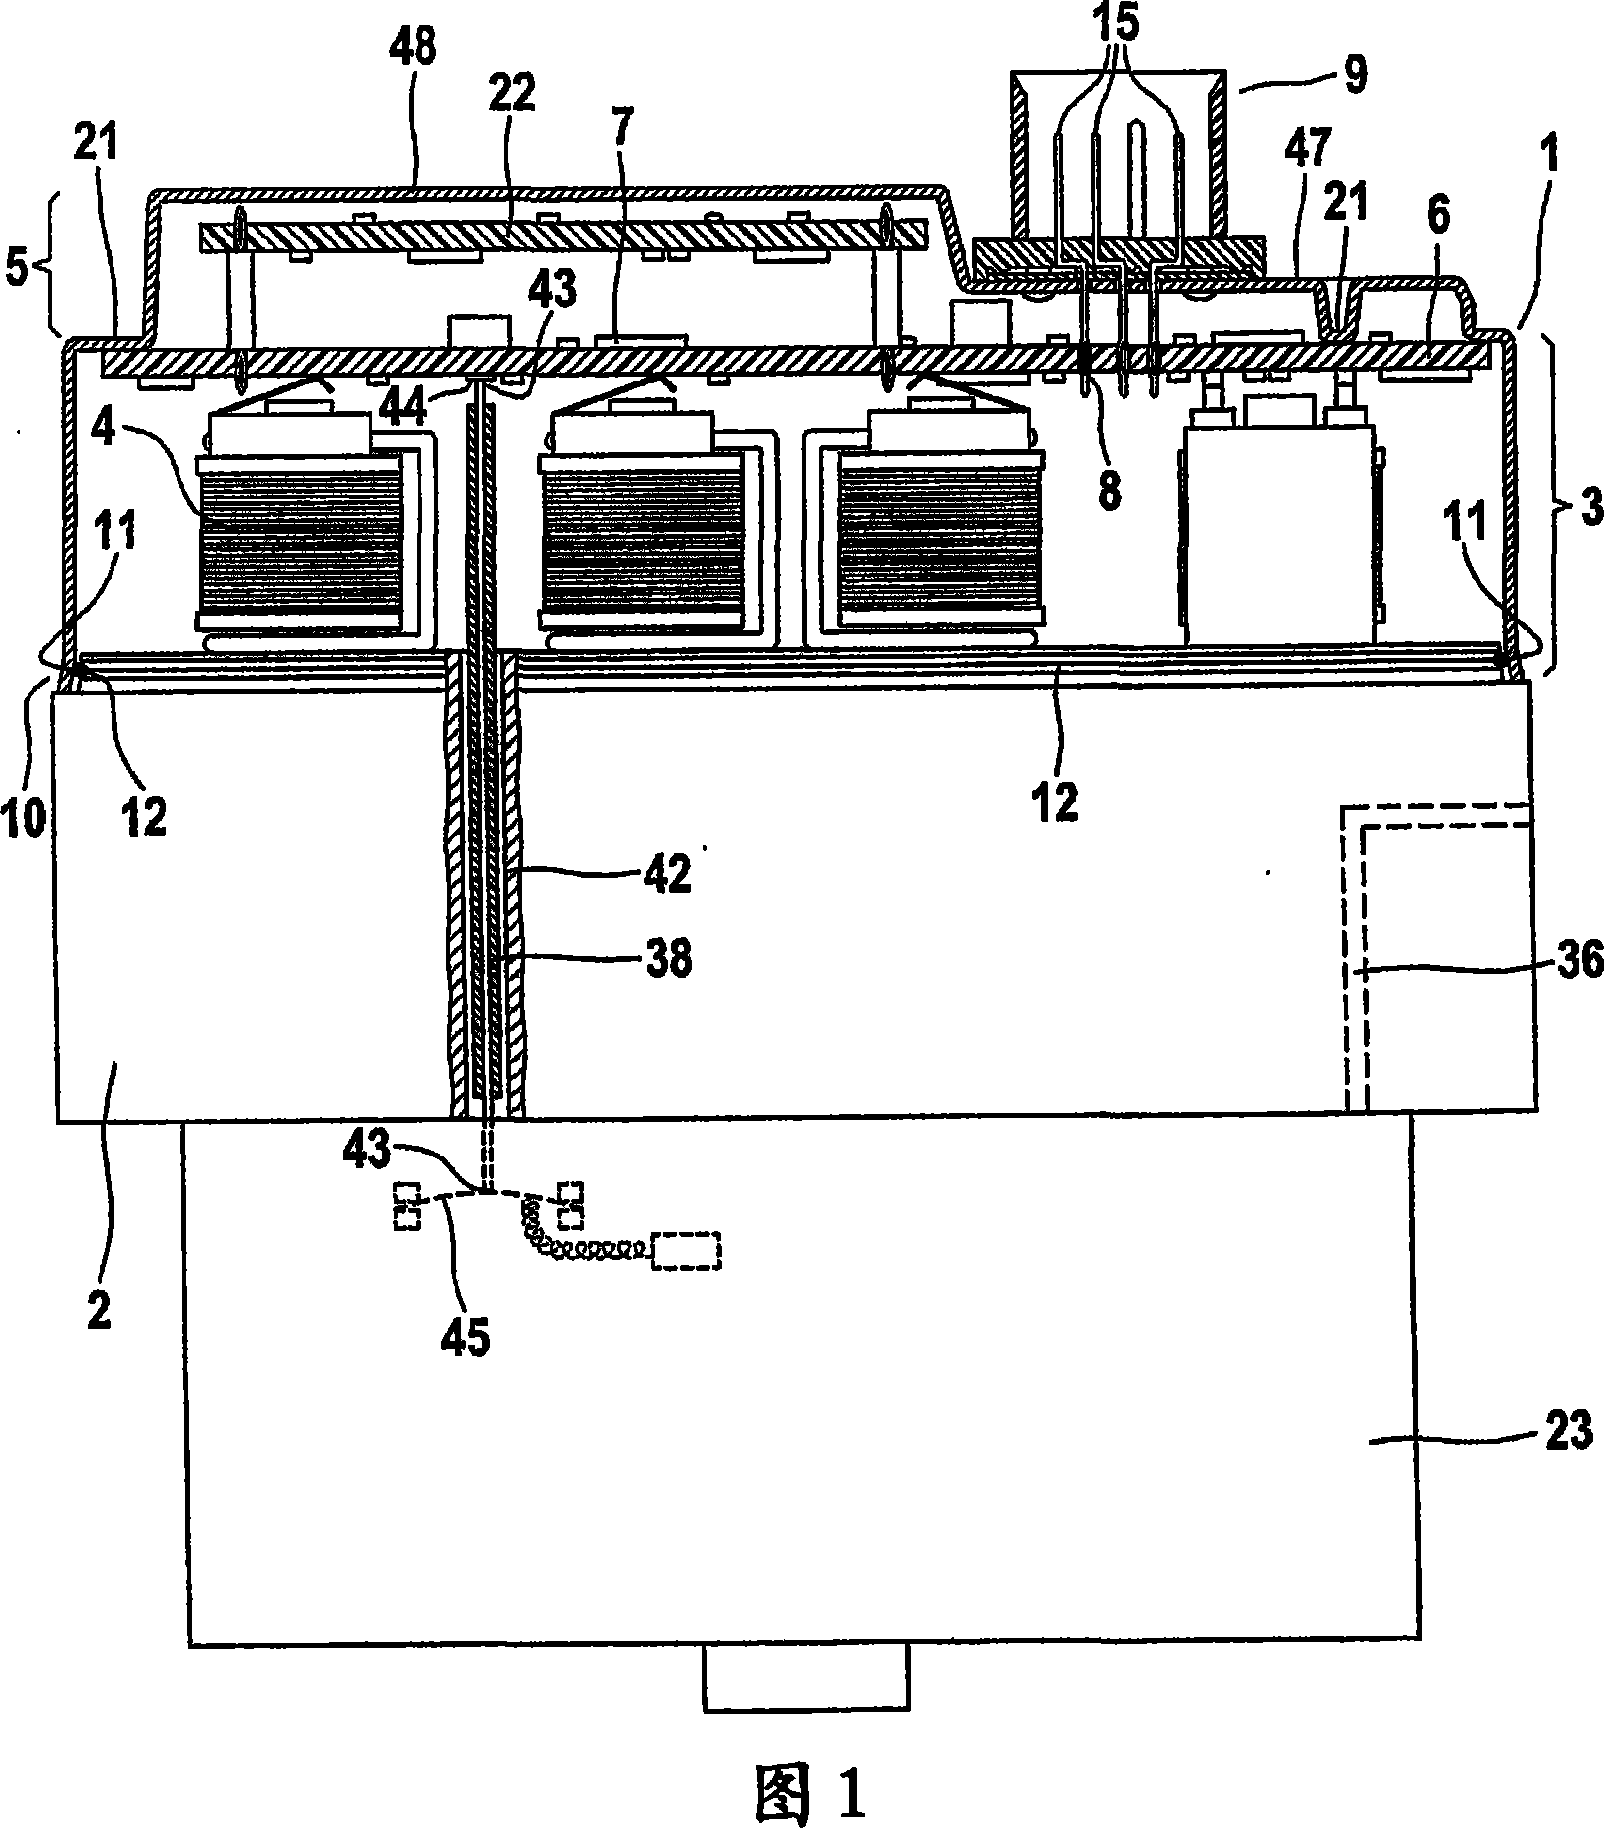 Electrohydraulic pressure control device for automotive brake systems